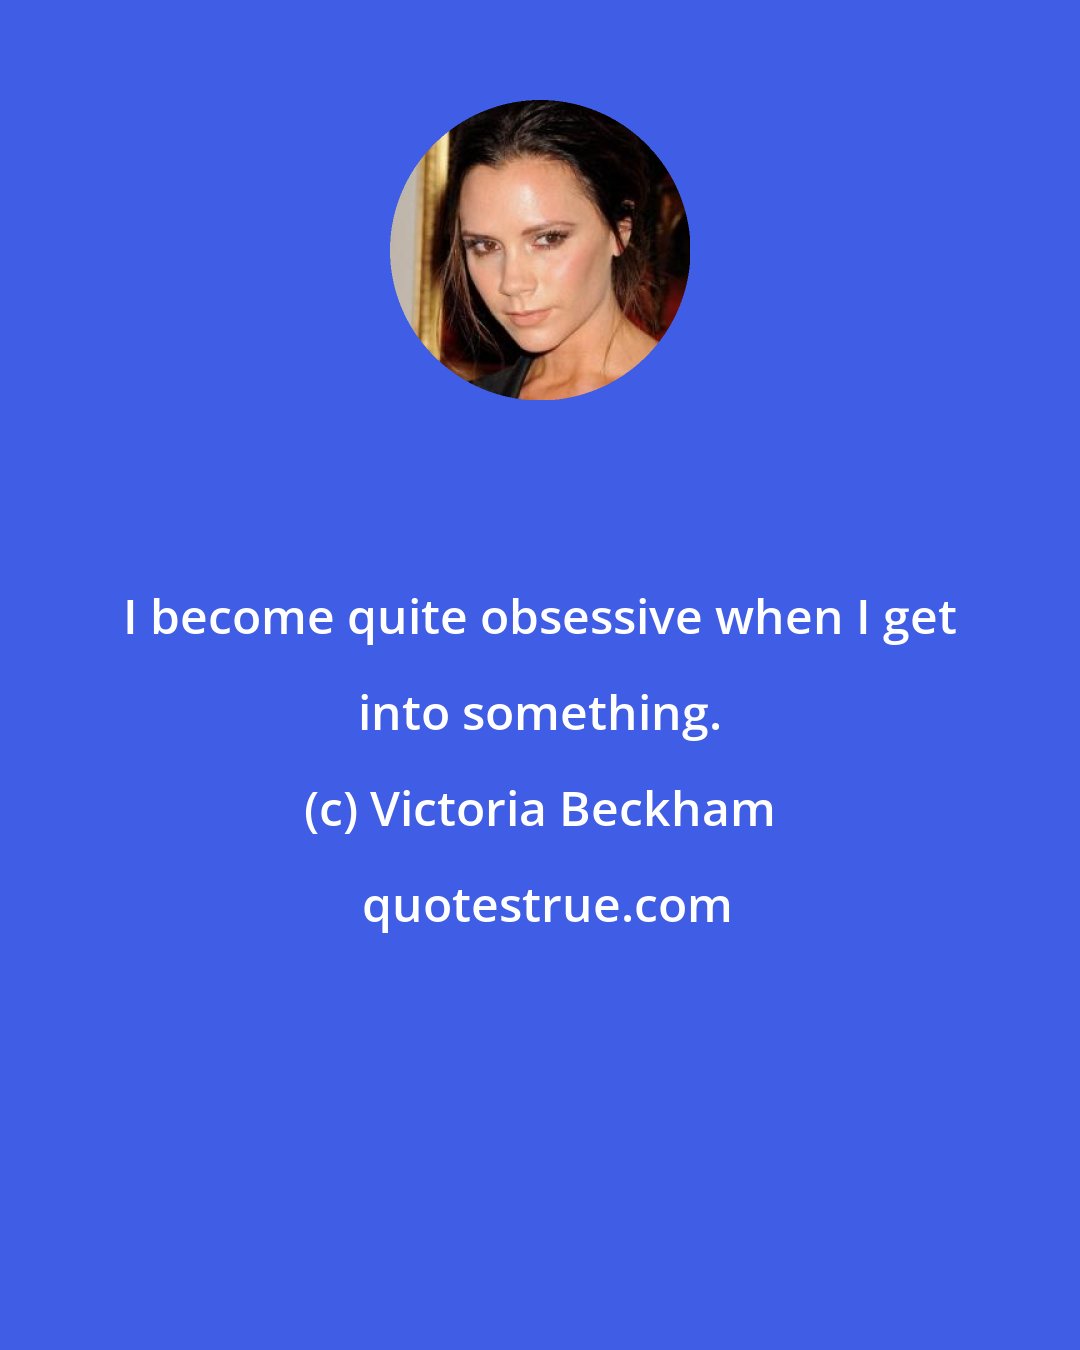 Victoria Beckham: I become quite obsessive when I get into something.